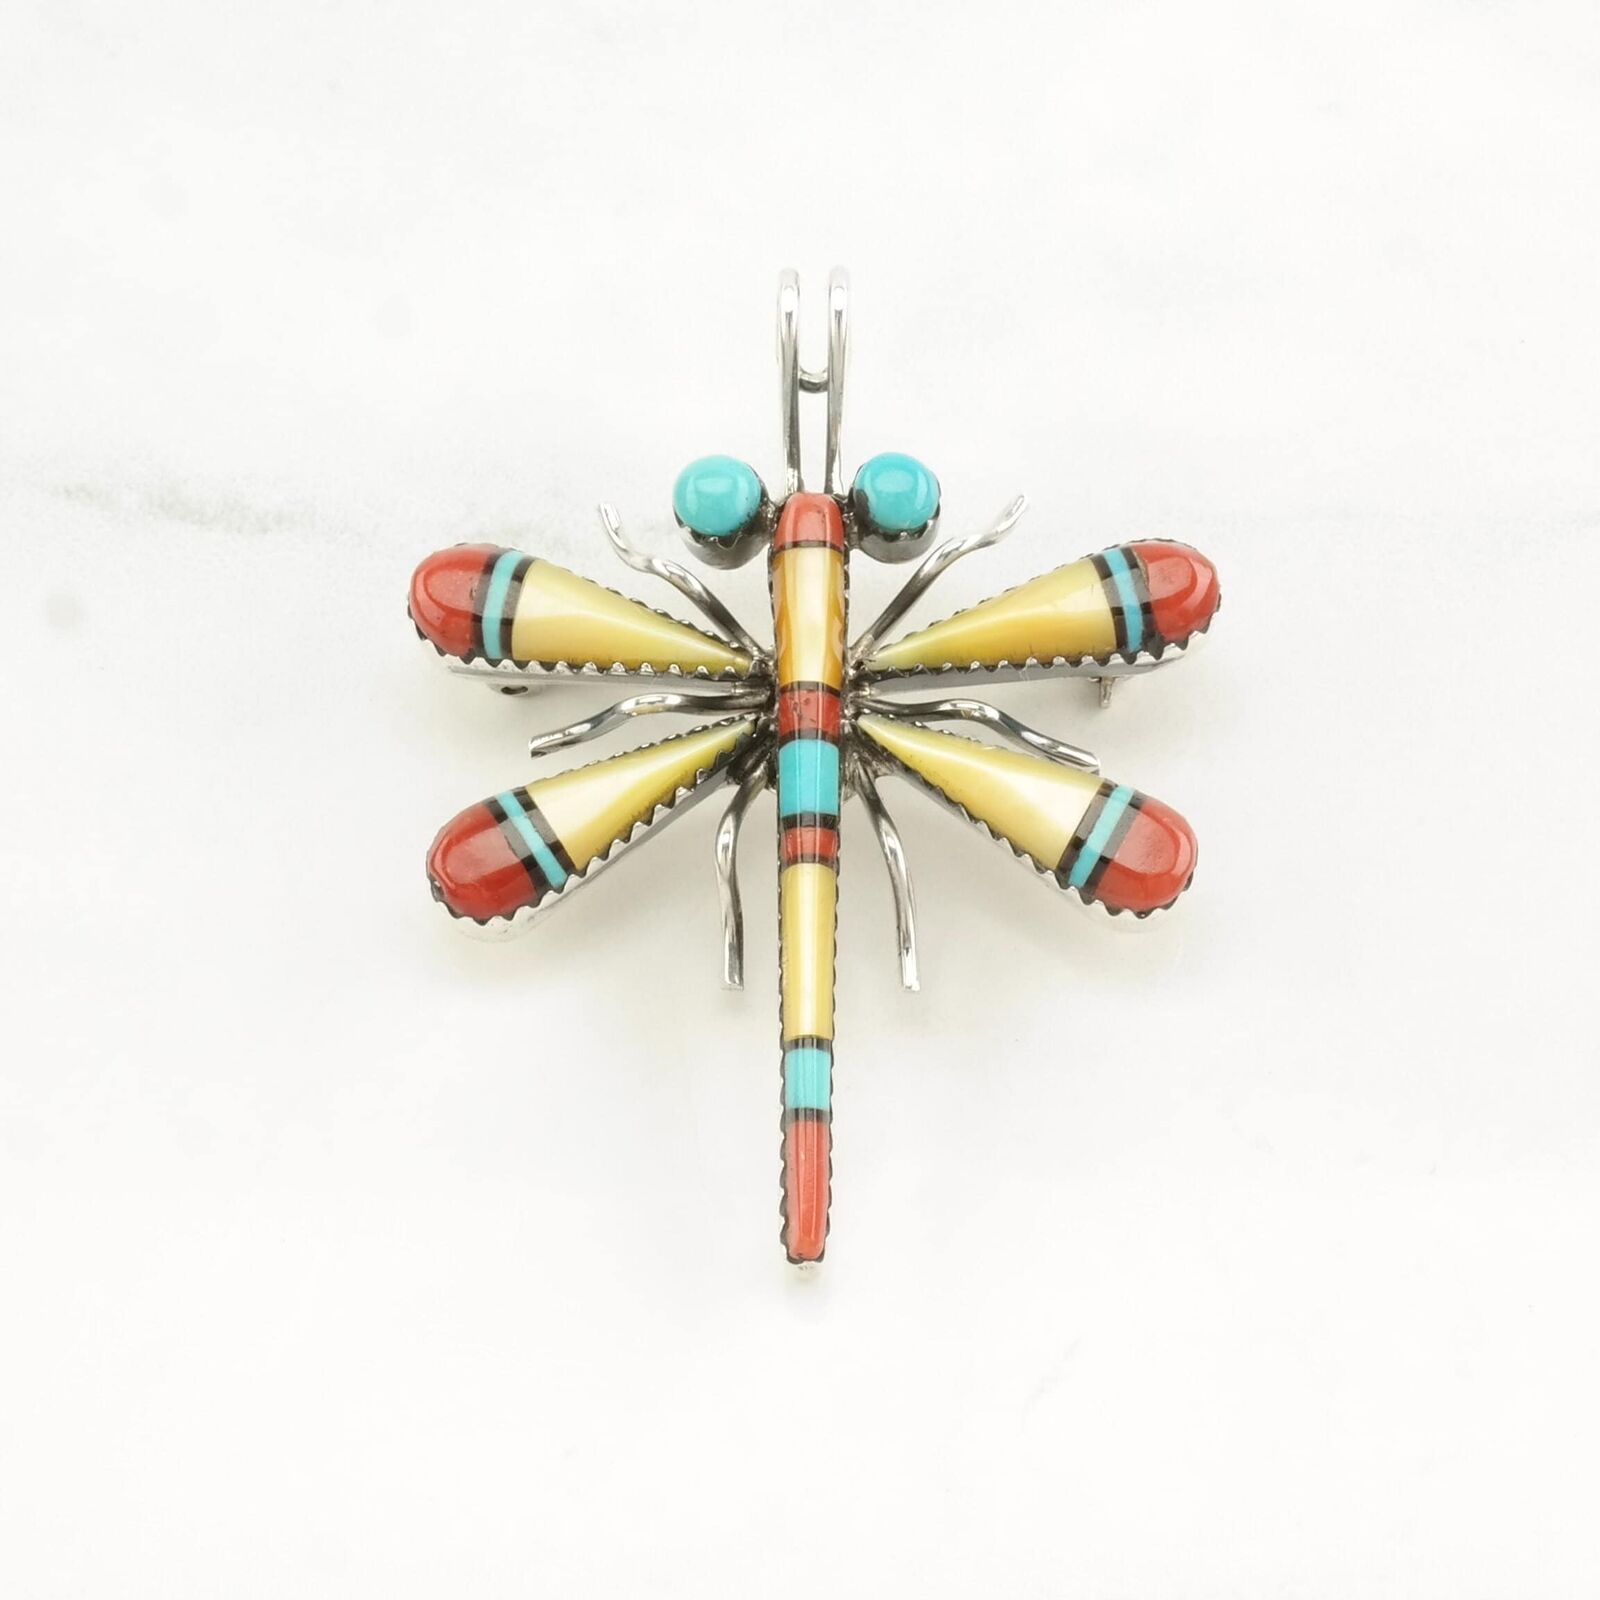 Vintage Zuni Sterling Silver Brooch Pendant Dragonfly Turquoise, Coral Inlay